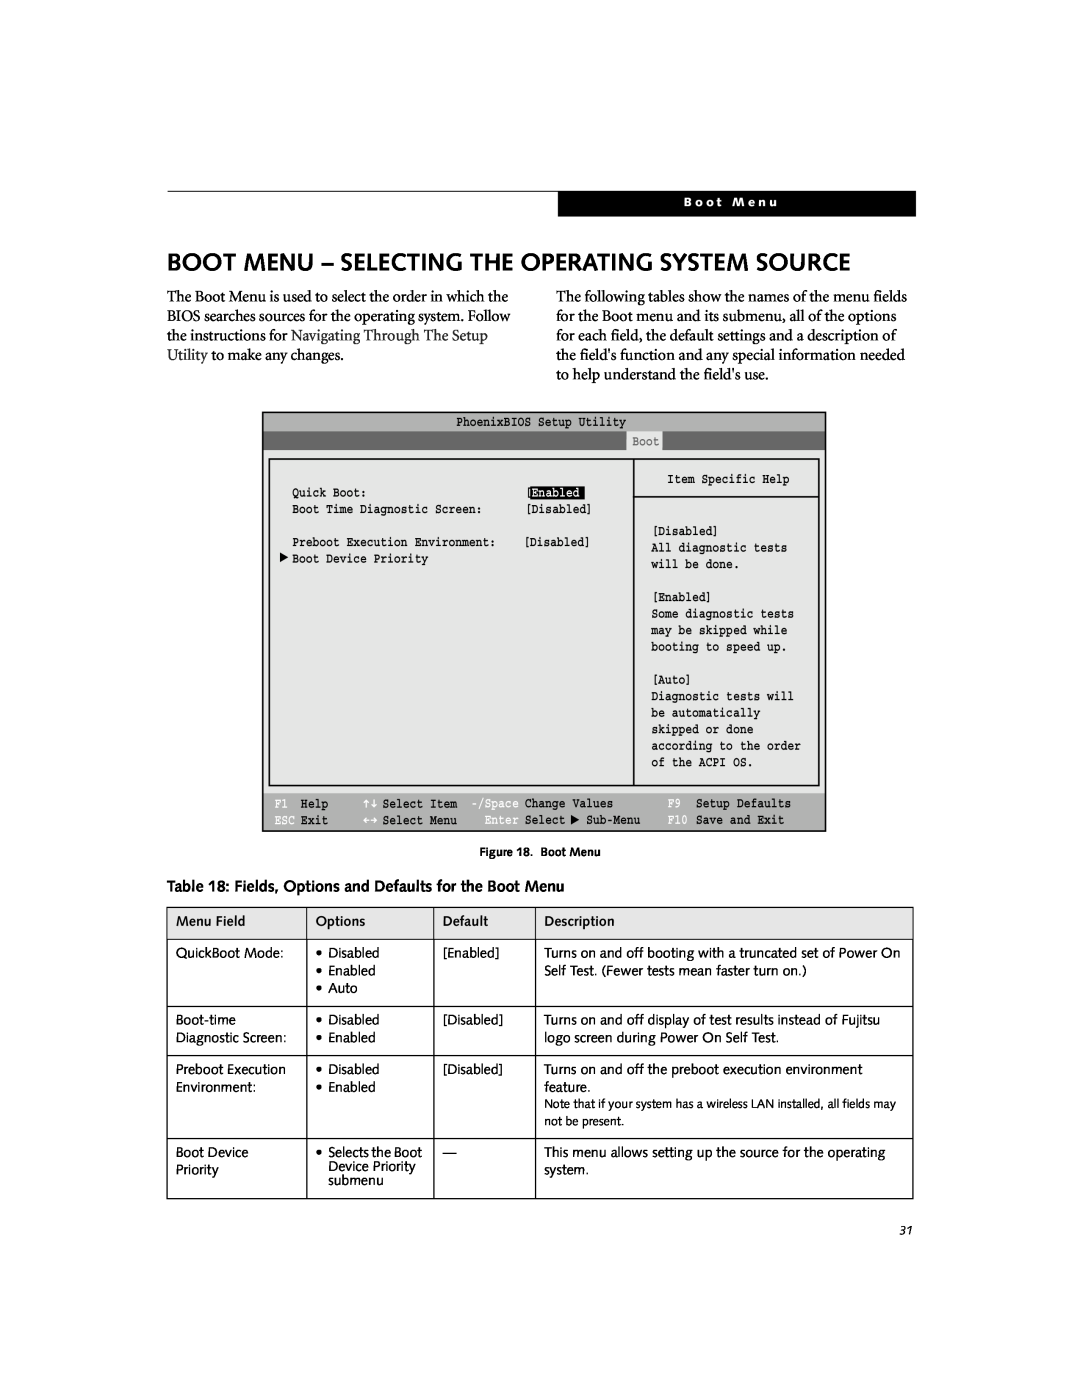 Fujitsu B2610 manual Boot Menu - Selecting The Operating System Source, Fields, Options and Defaults for the Boot Menu 